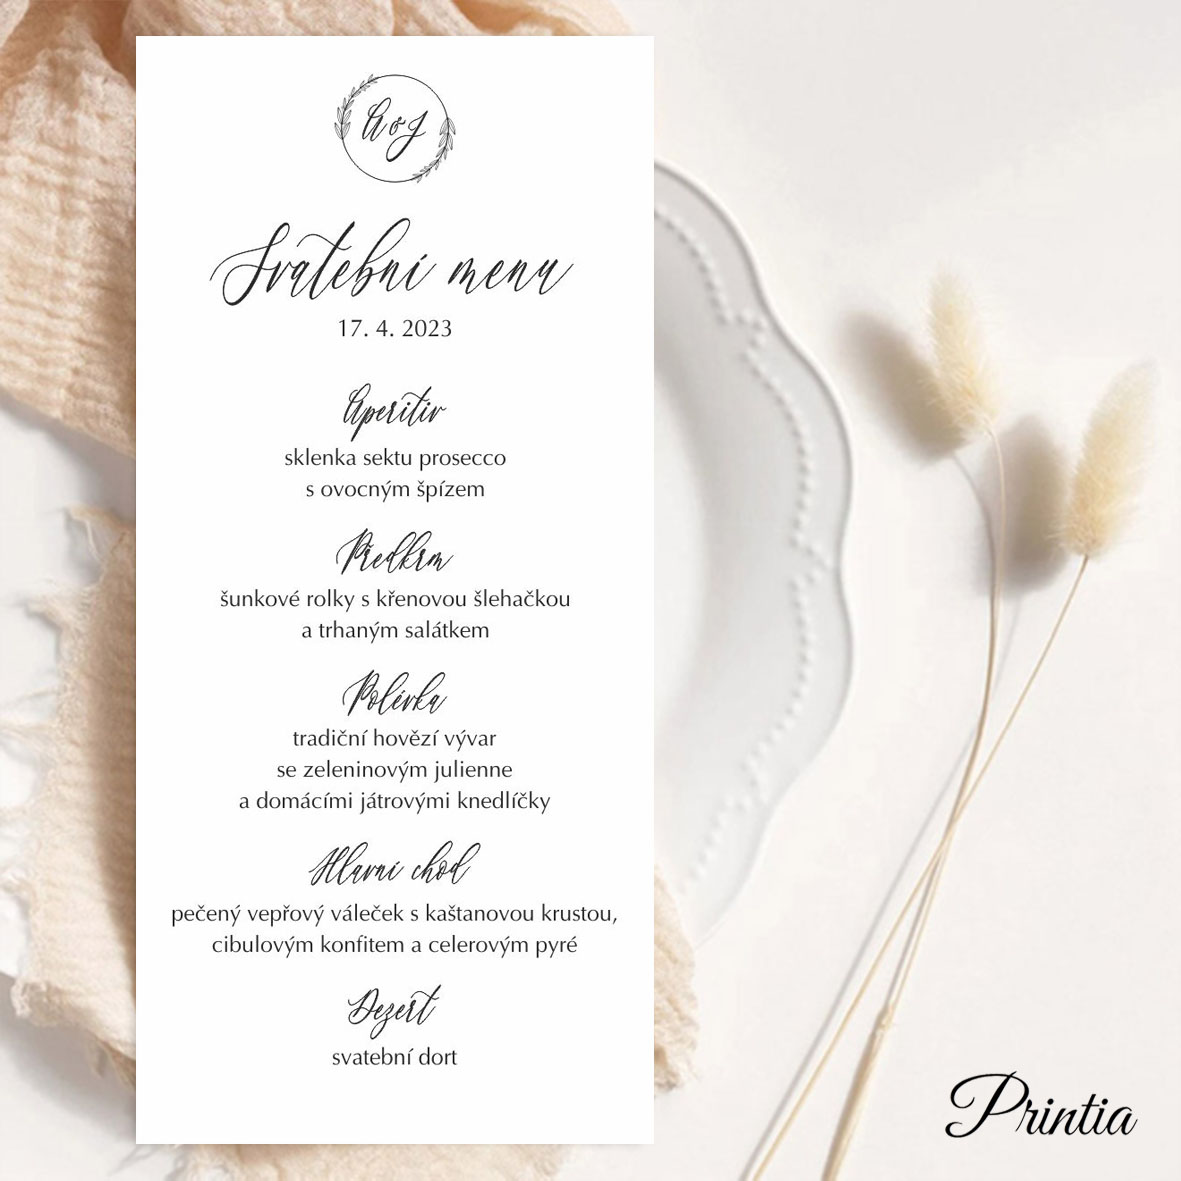 Wedding menu with a wreath with initials 